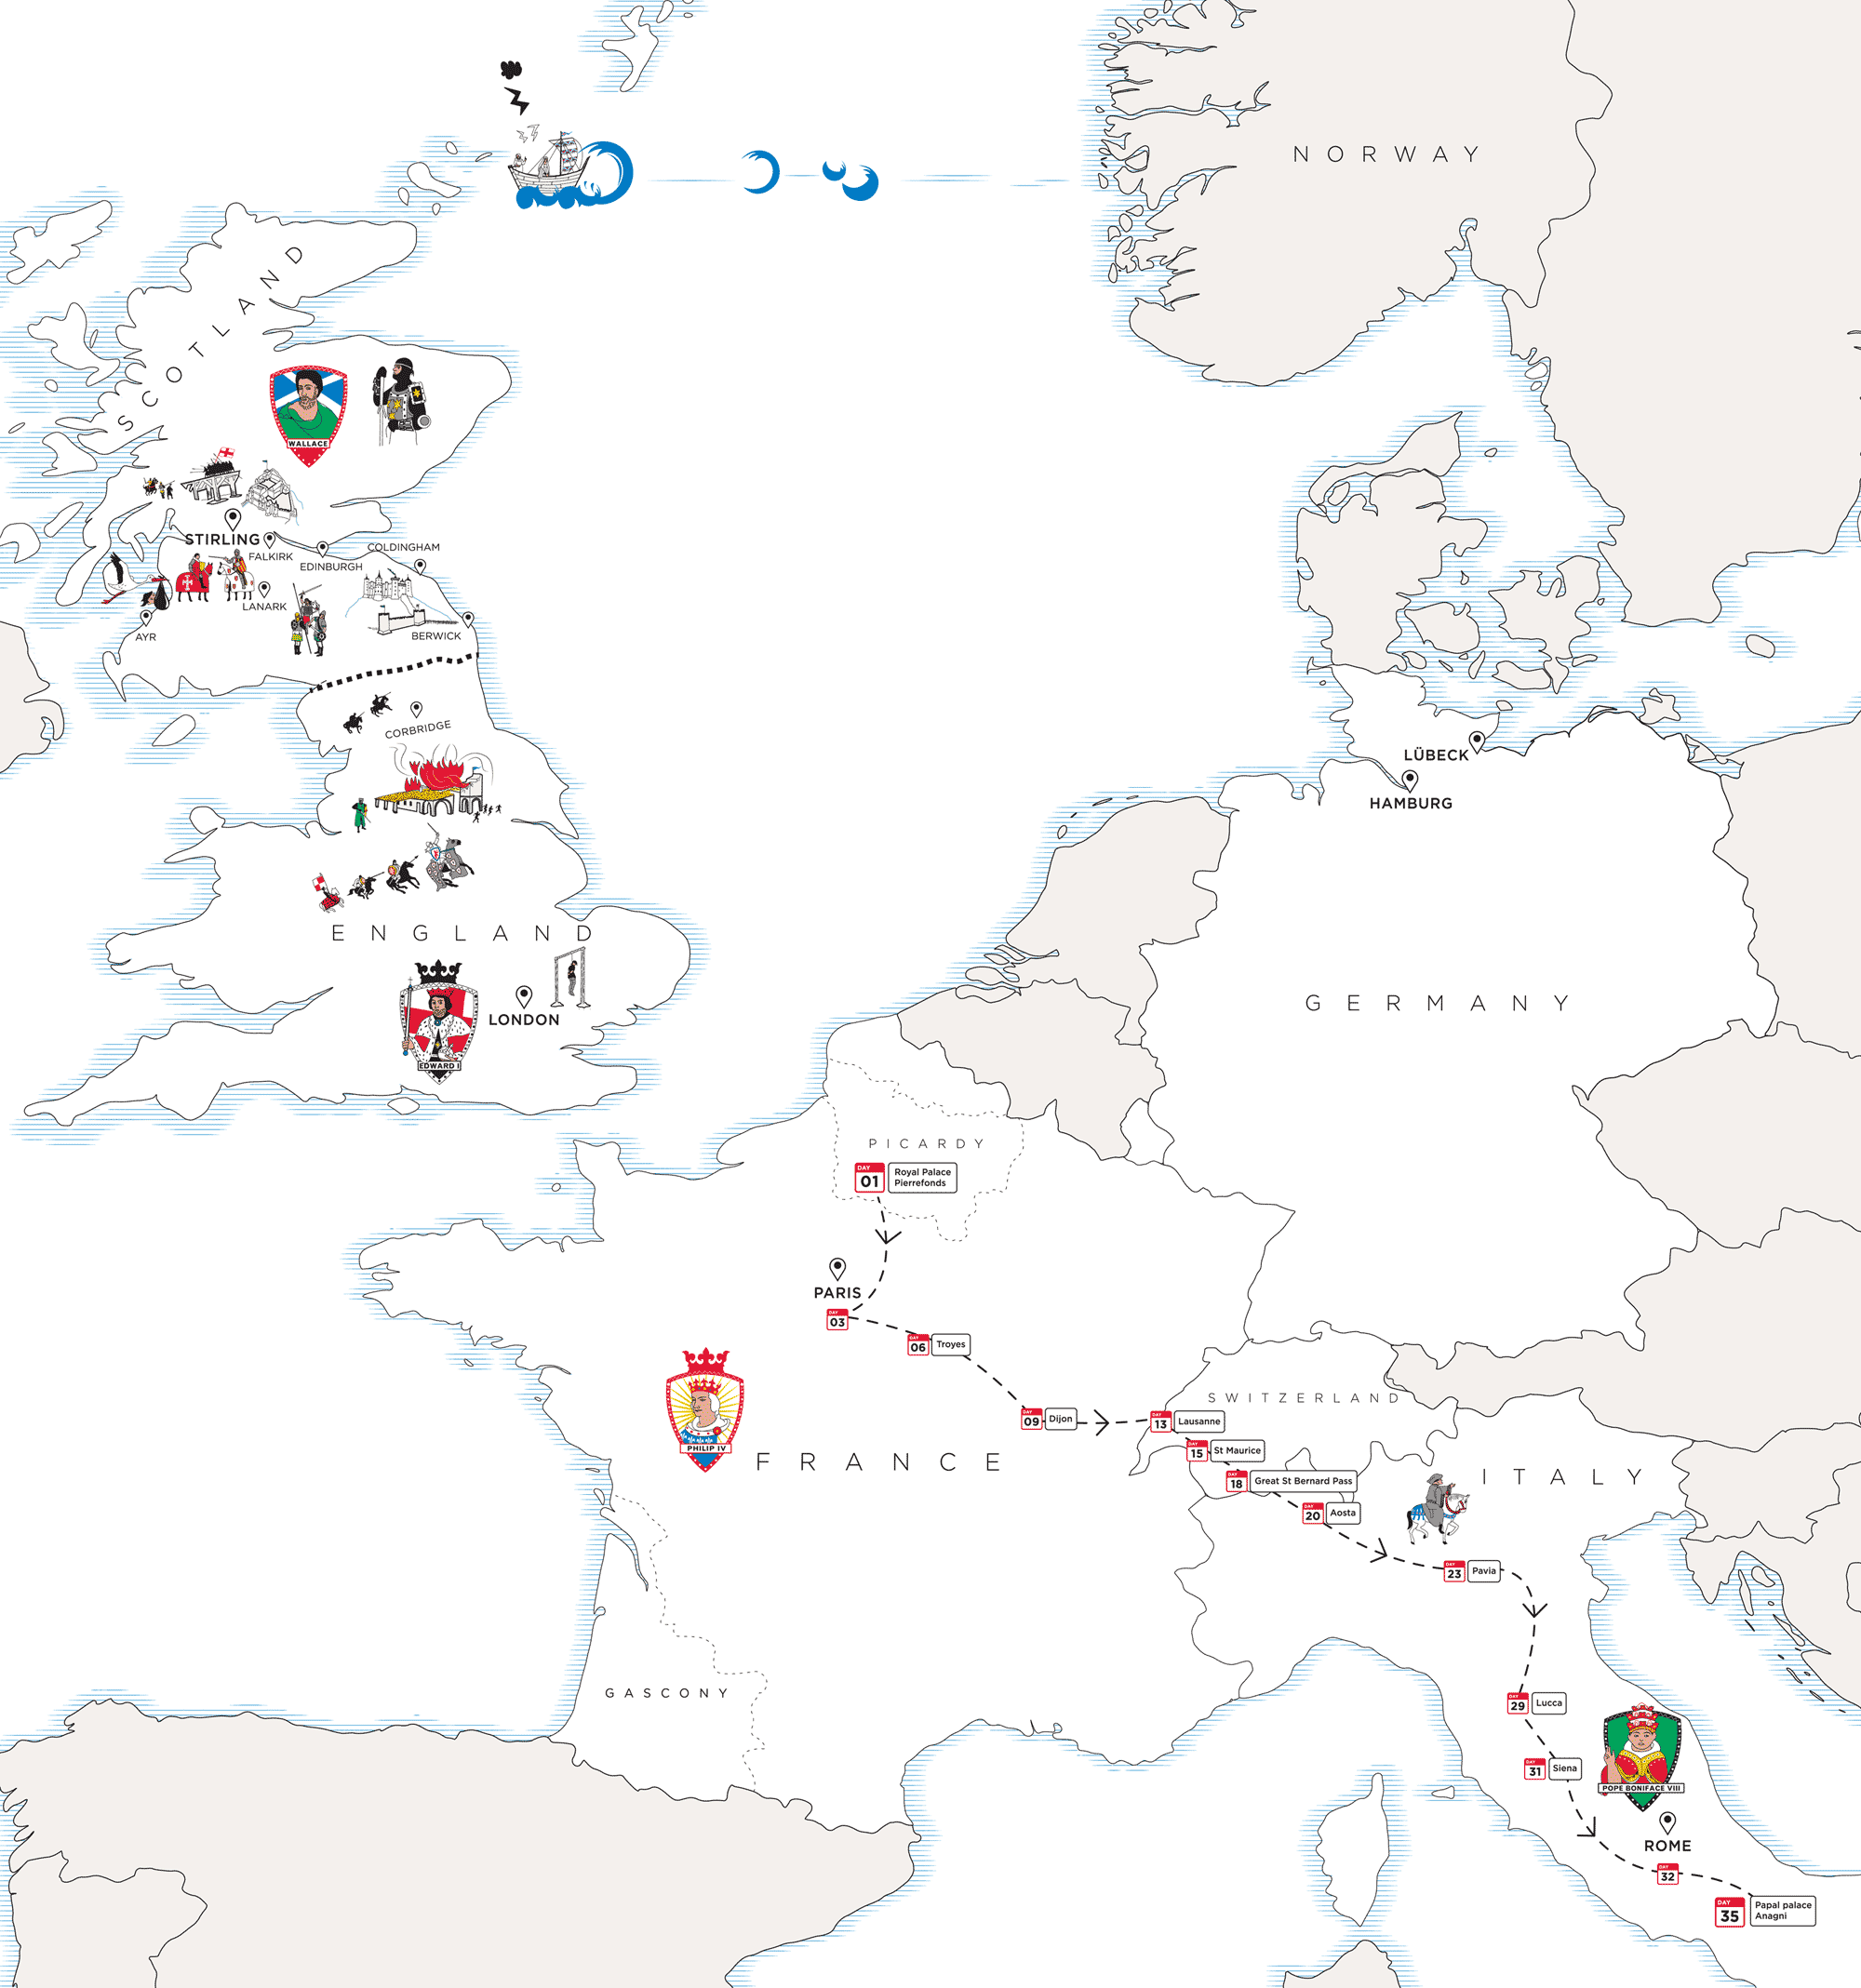 Image shows a map of 14th century Europe, highlighting people and events relating to the Scottish Wars of Independence